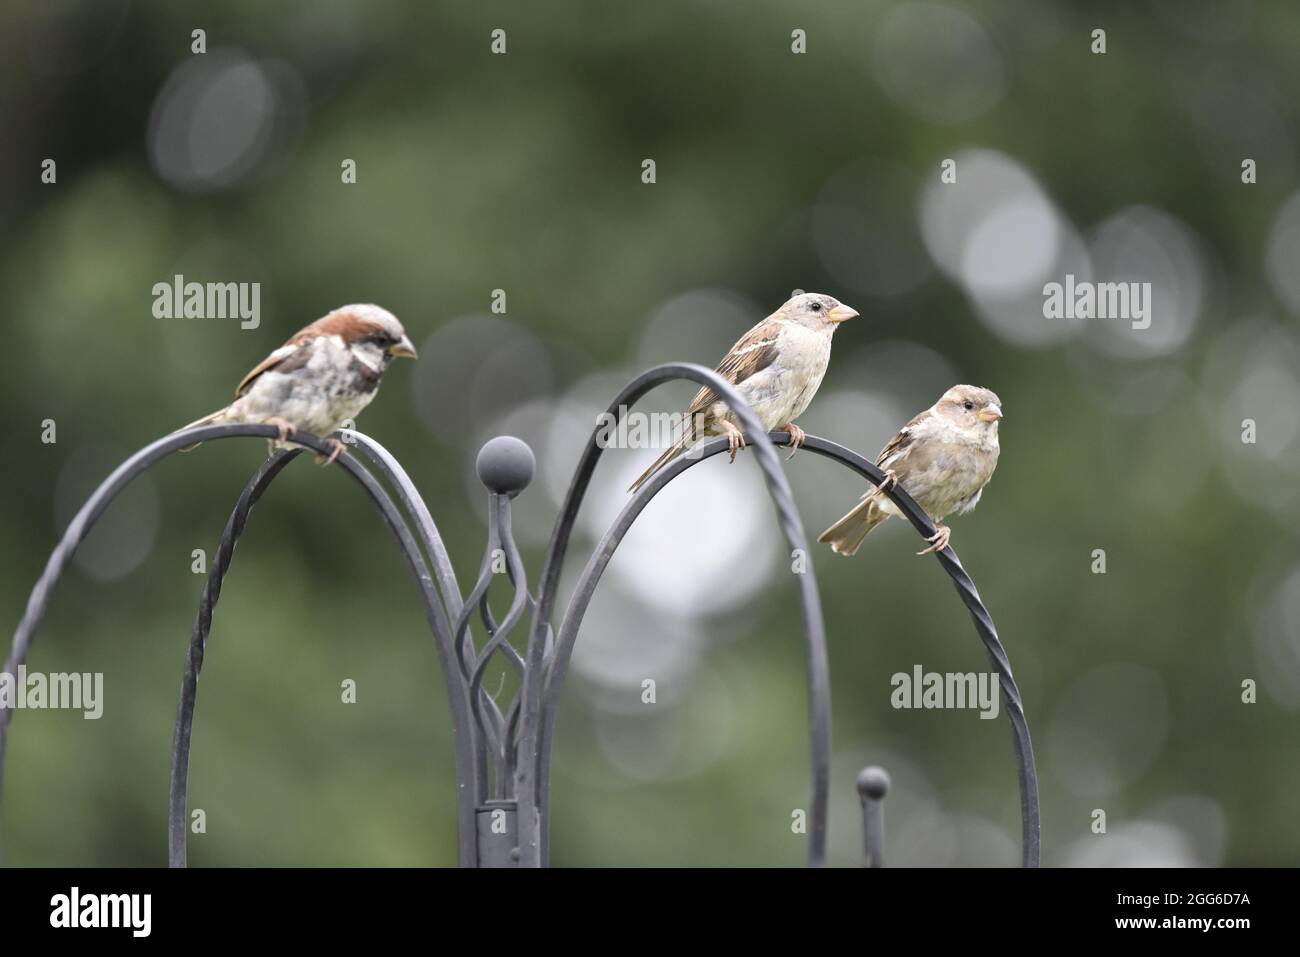 Close-Up of Three House Sparrows (Passer domesticus) in Right-Profile, Perched on Top of a Bird Feeder, with Bokeh Effect Background in Summer in UK Stock Photo